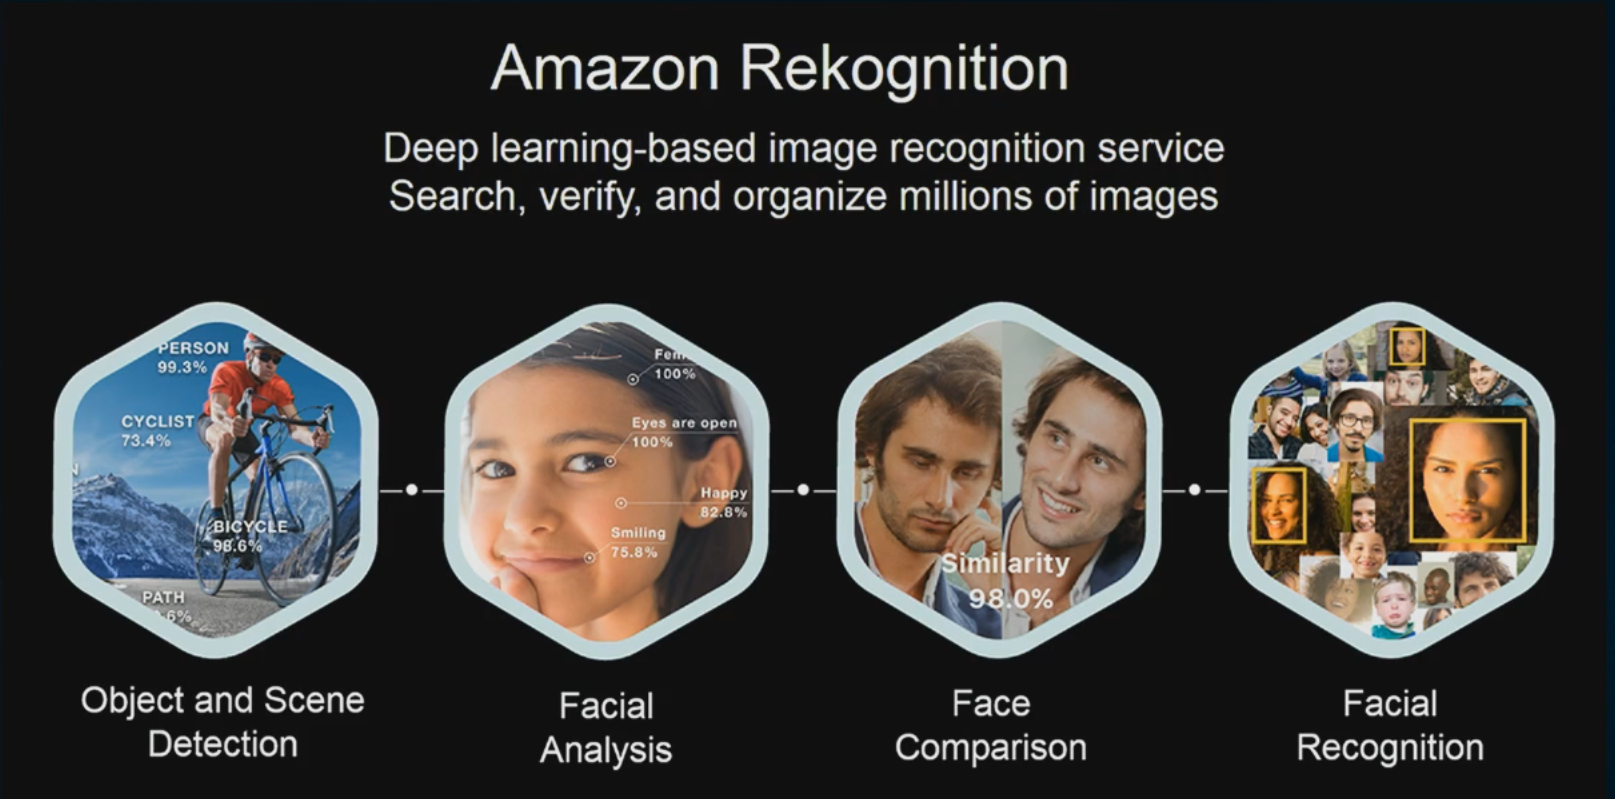 Amazon Rekognition as an example of an image recognition app